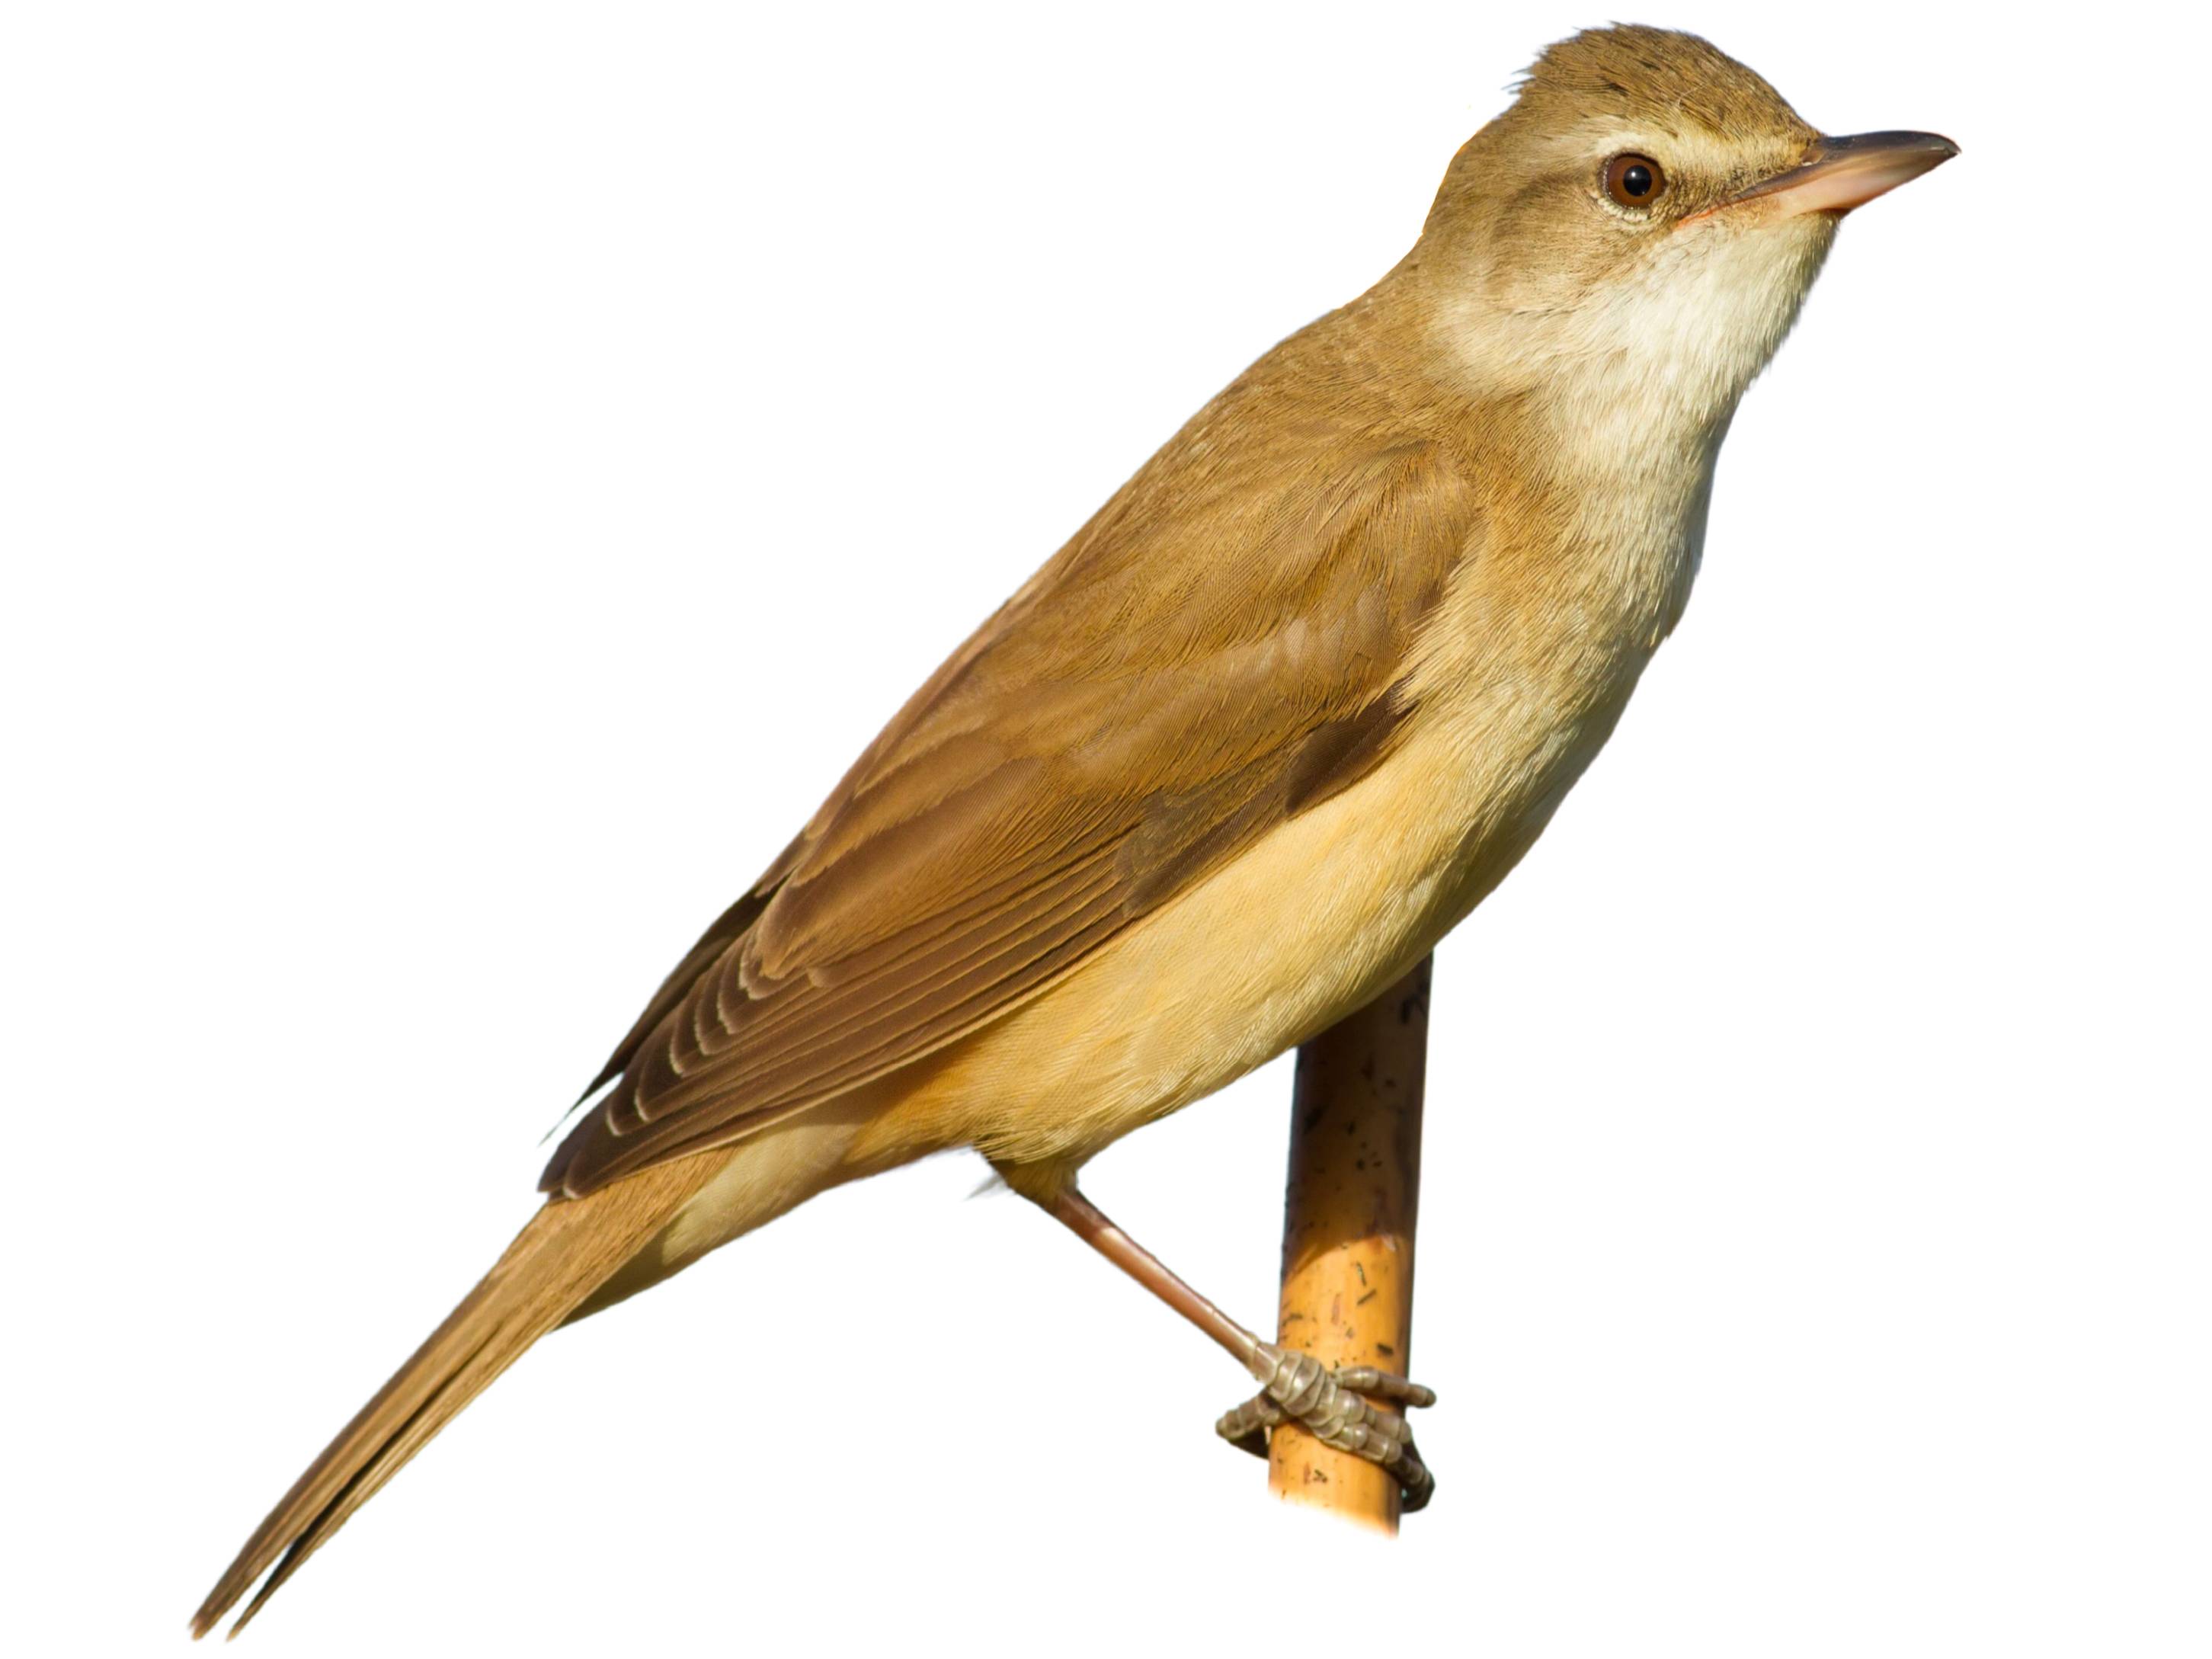 A photo of a Great Reed Warbler (Acrocephalus arundinaceus)